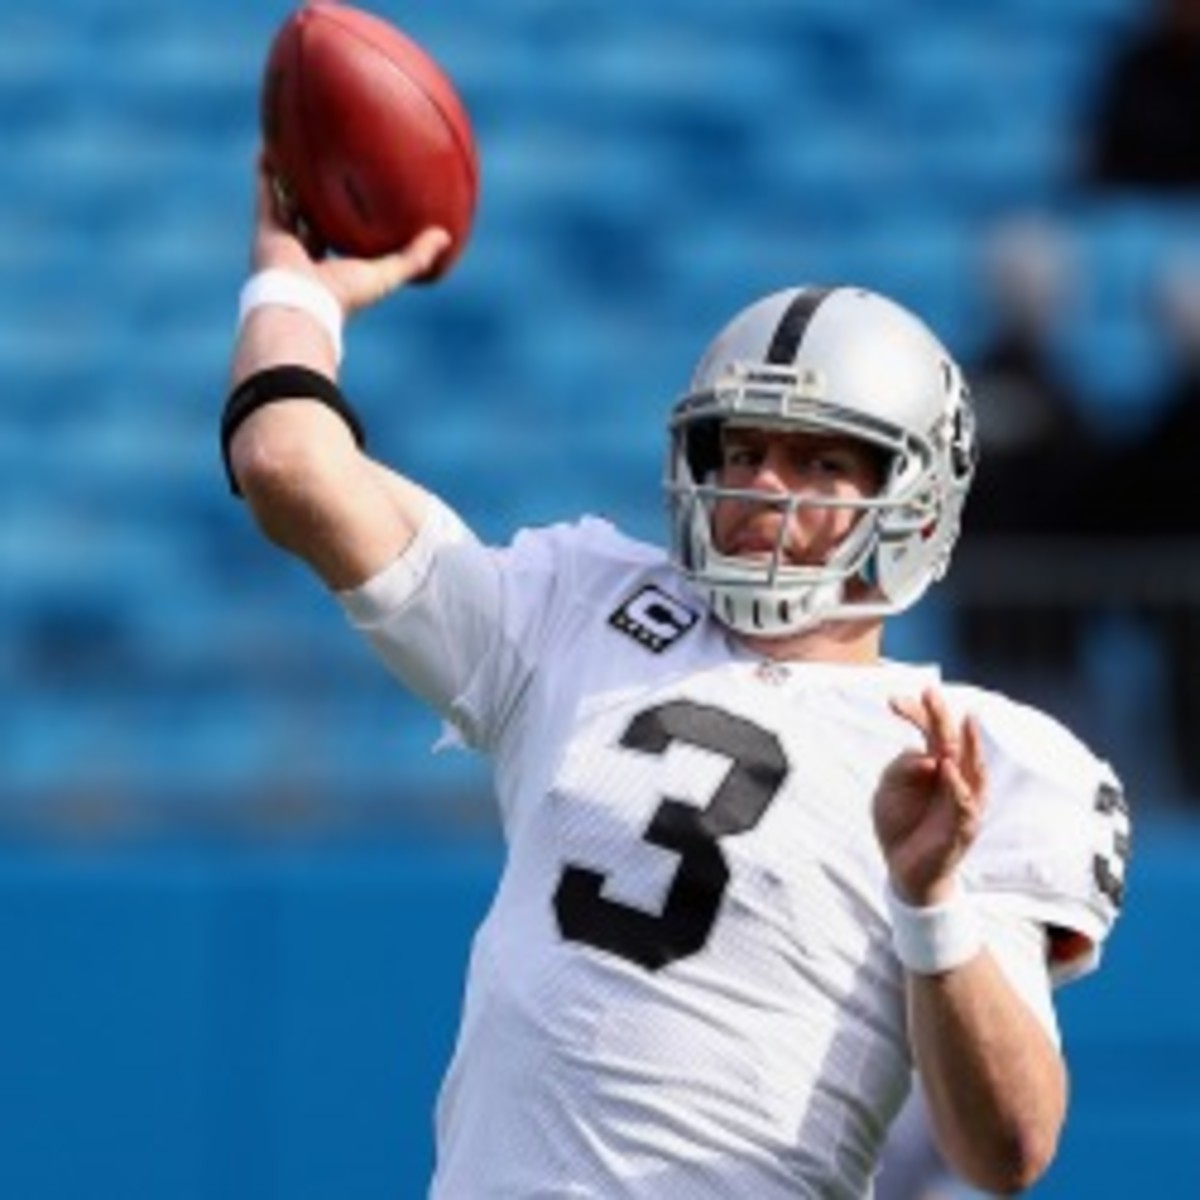 Raiders quarterback Carson Palmer is due $13 million in 2013. (Streeter Lecka/Getty Images)